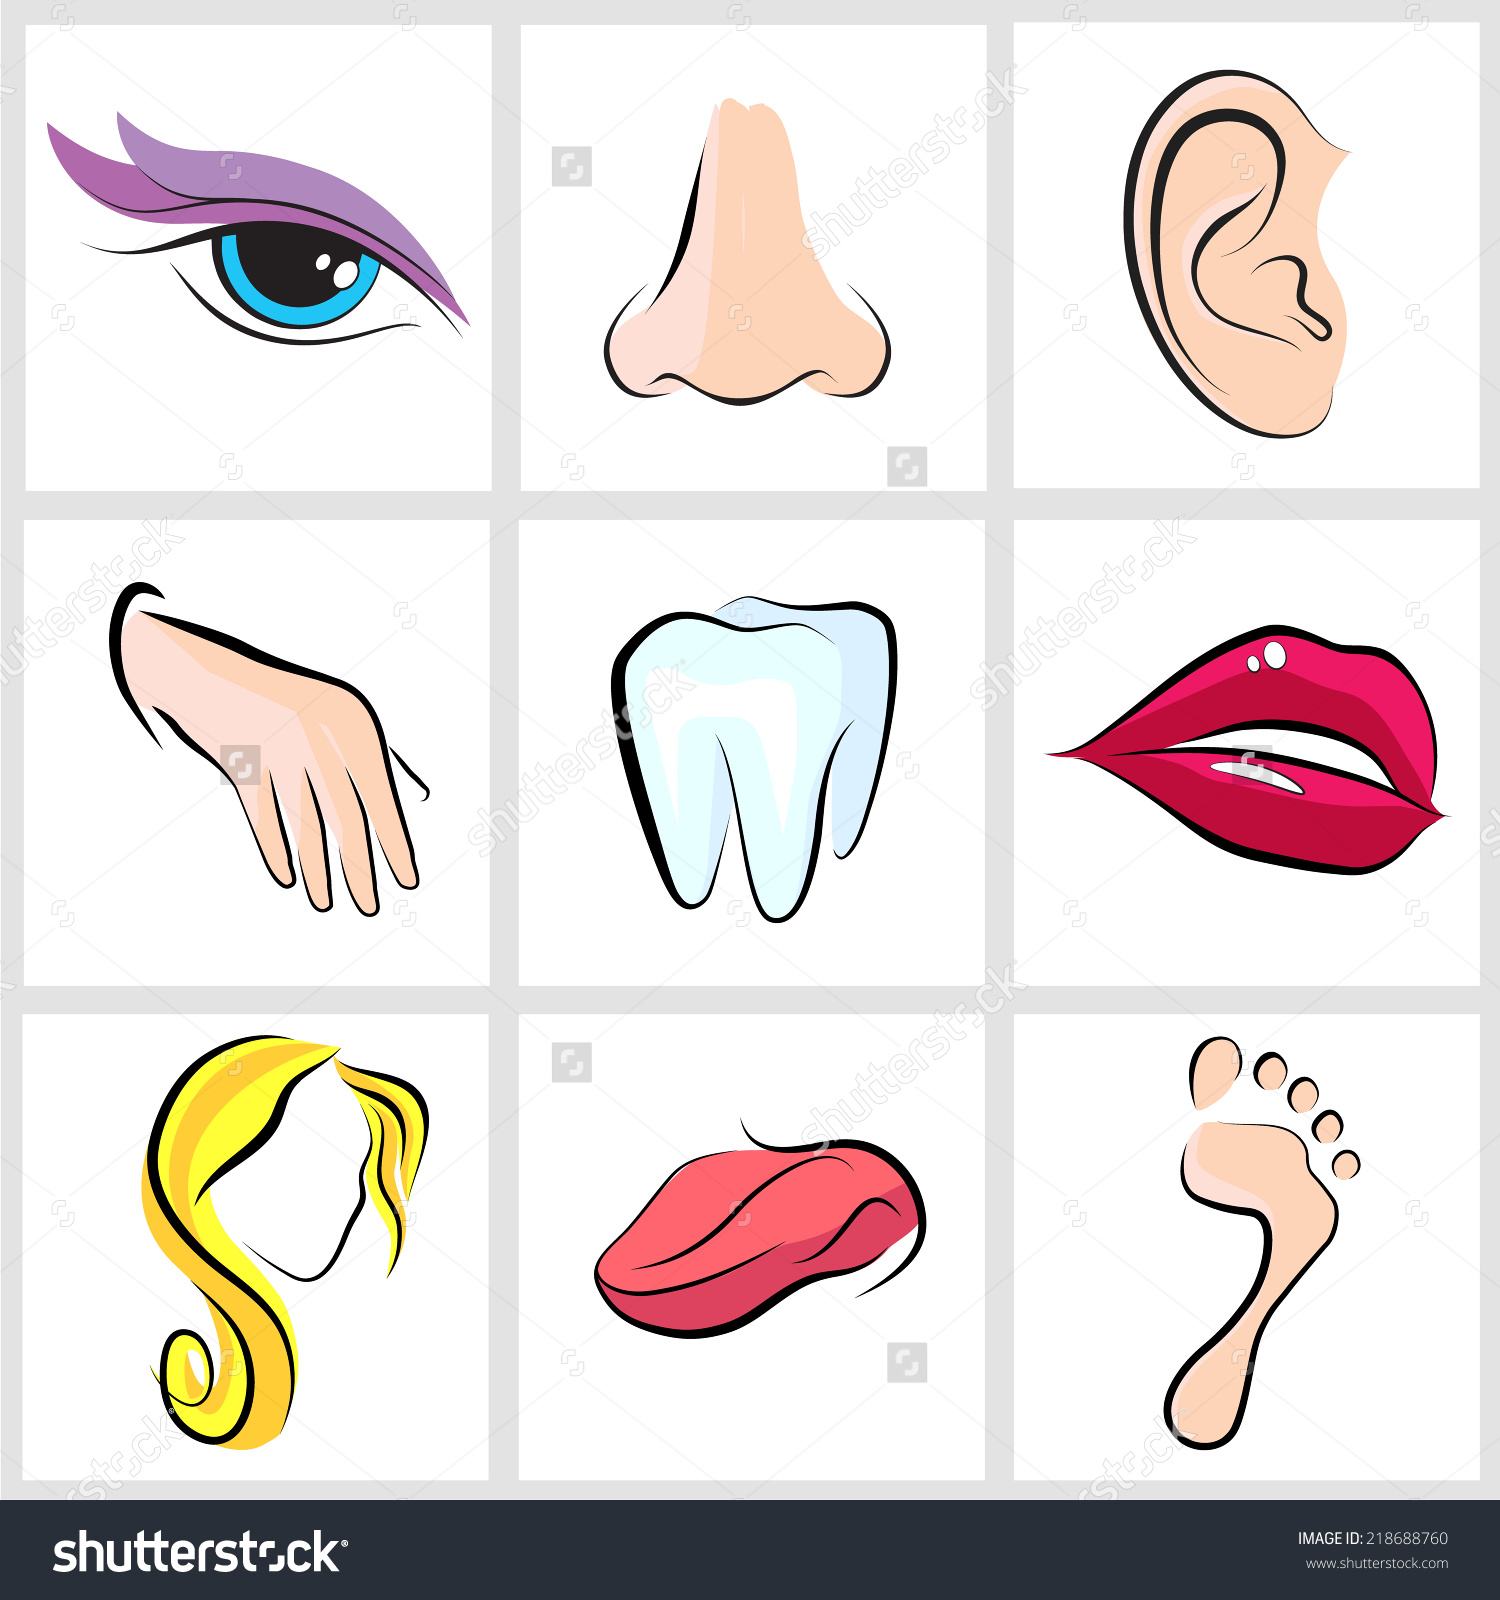 Ear clipart tongue. Eyes free cliparts download